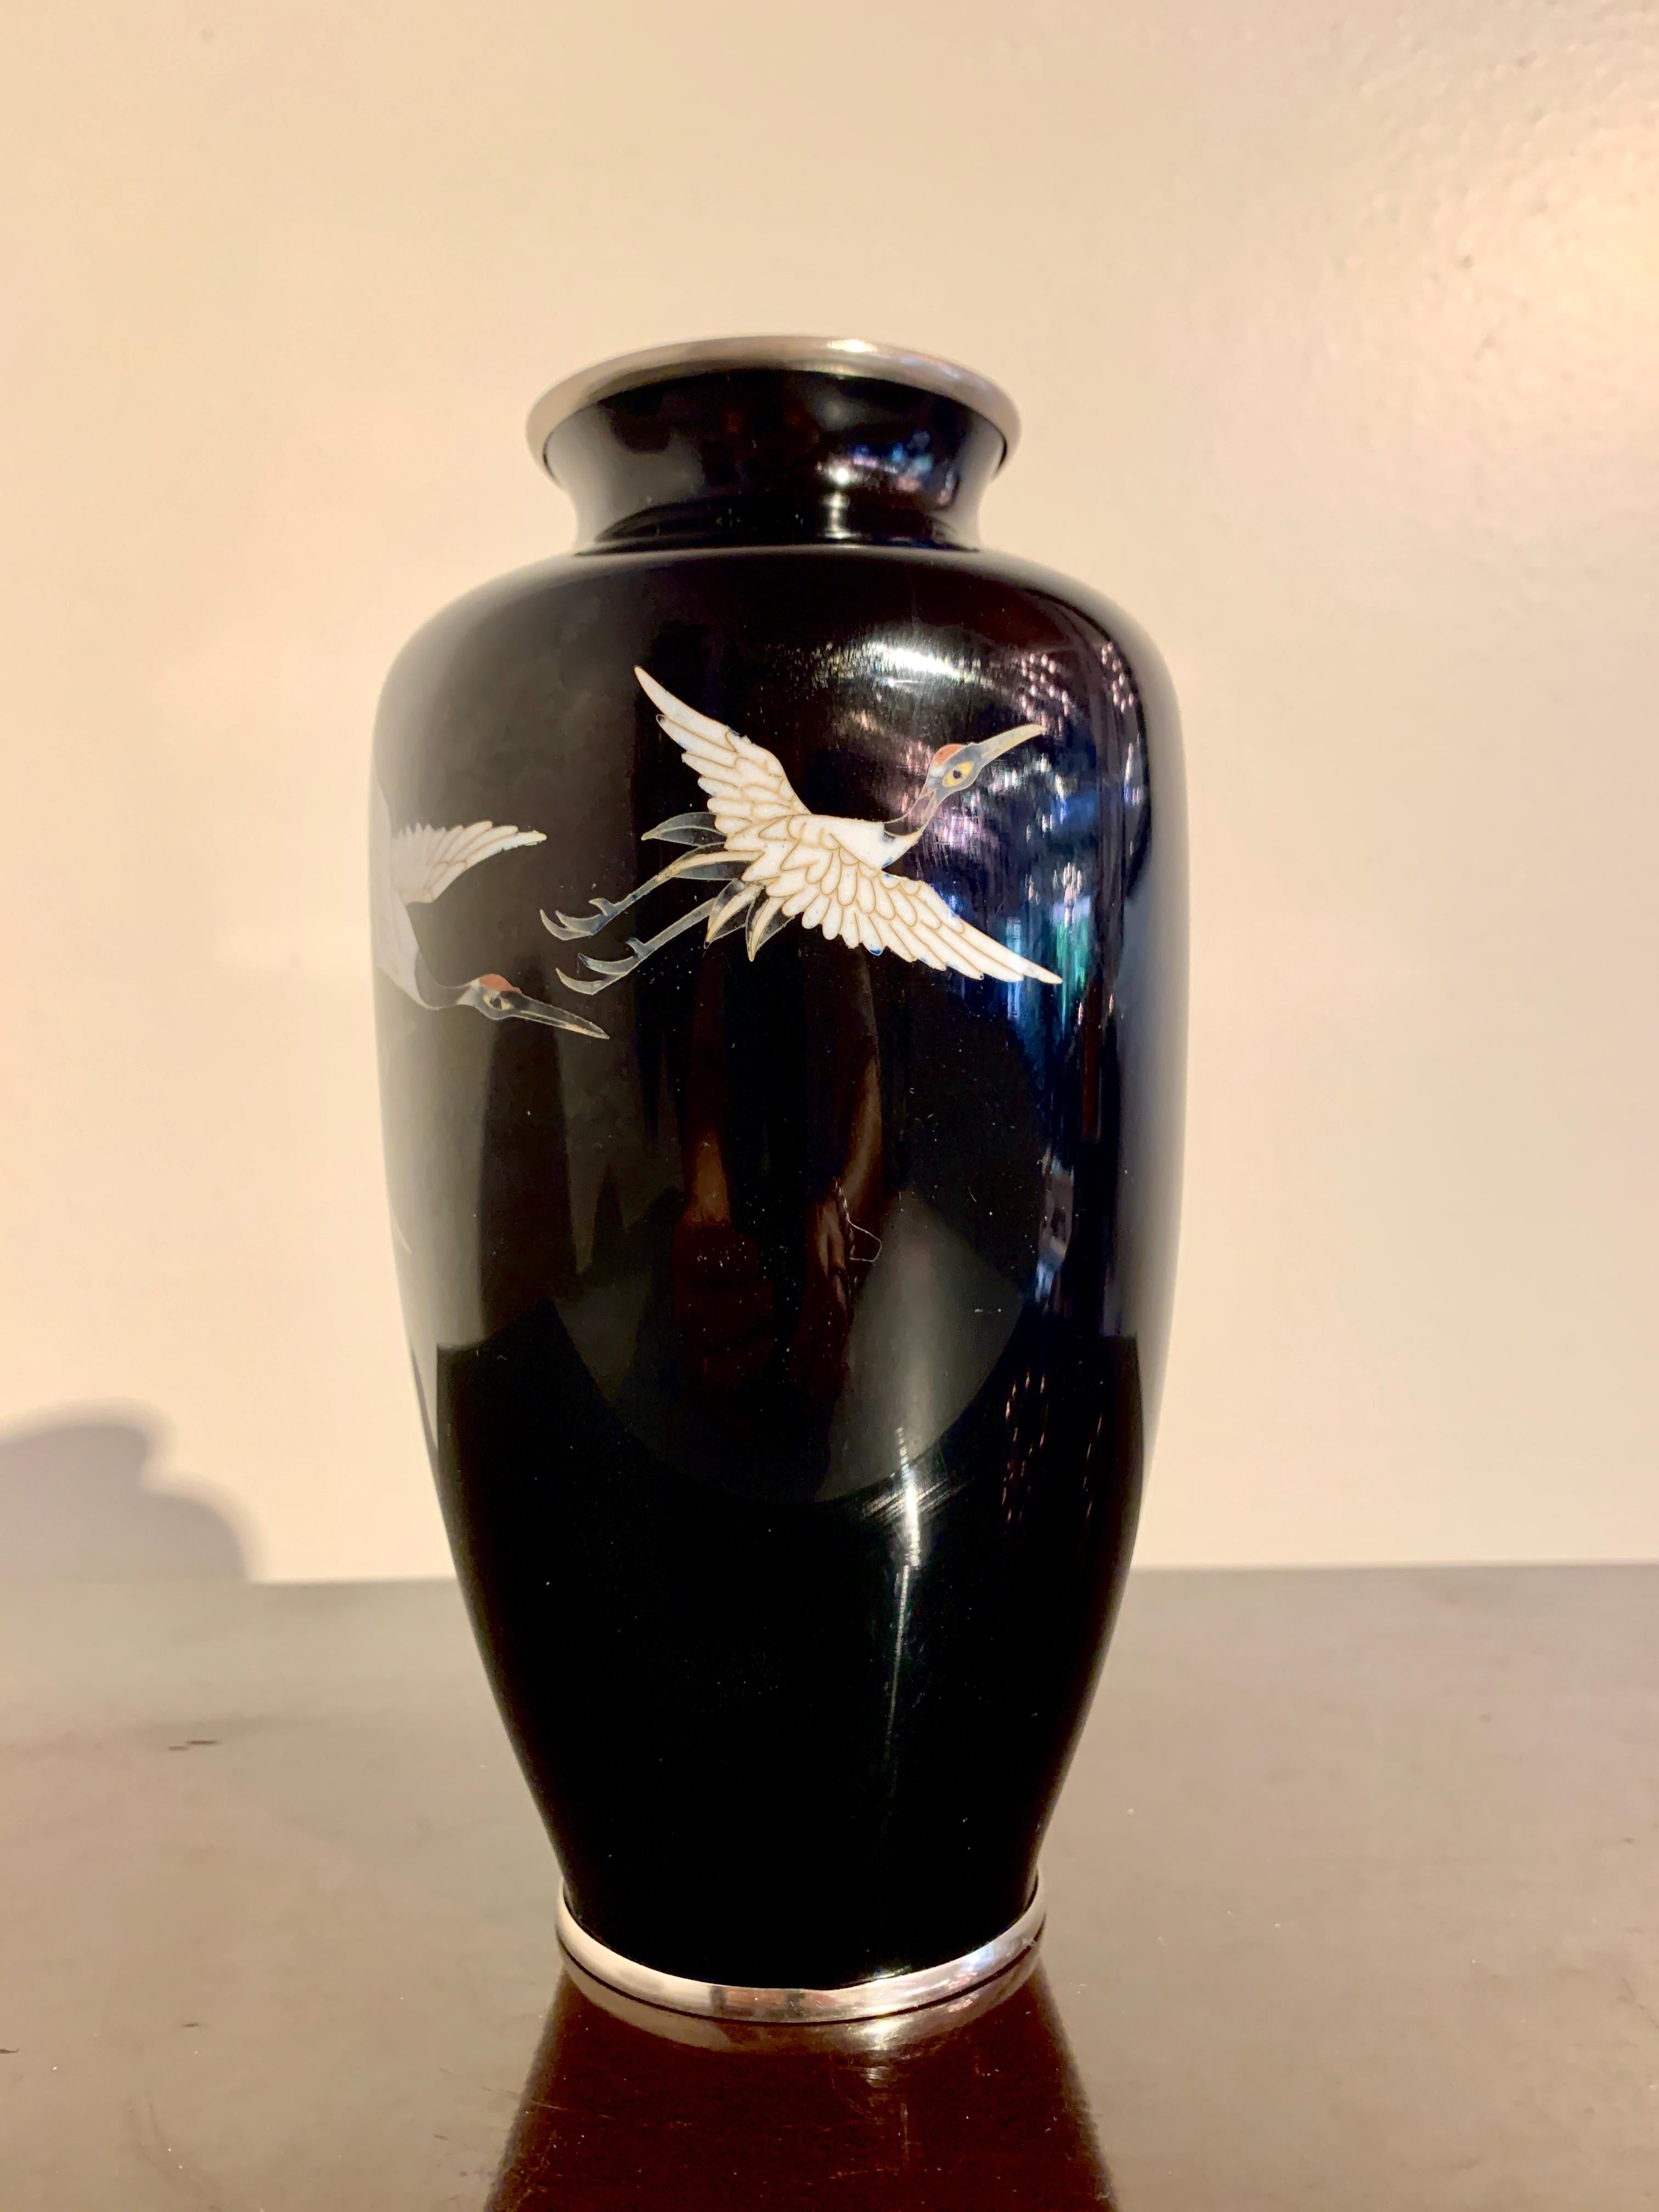 A nice Japanese mirror black cloisonné vase with cranes in flight, by the Sato Cloisonne Company, Showa Period, mid 20th century, Japan.

The vase of baluster form, with an ovoid body, high shoulders, short neck, and slightly everted mouth. 
The